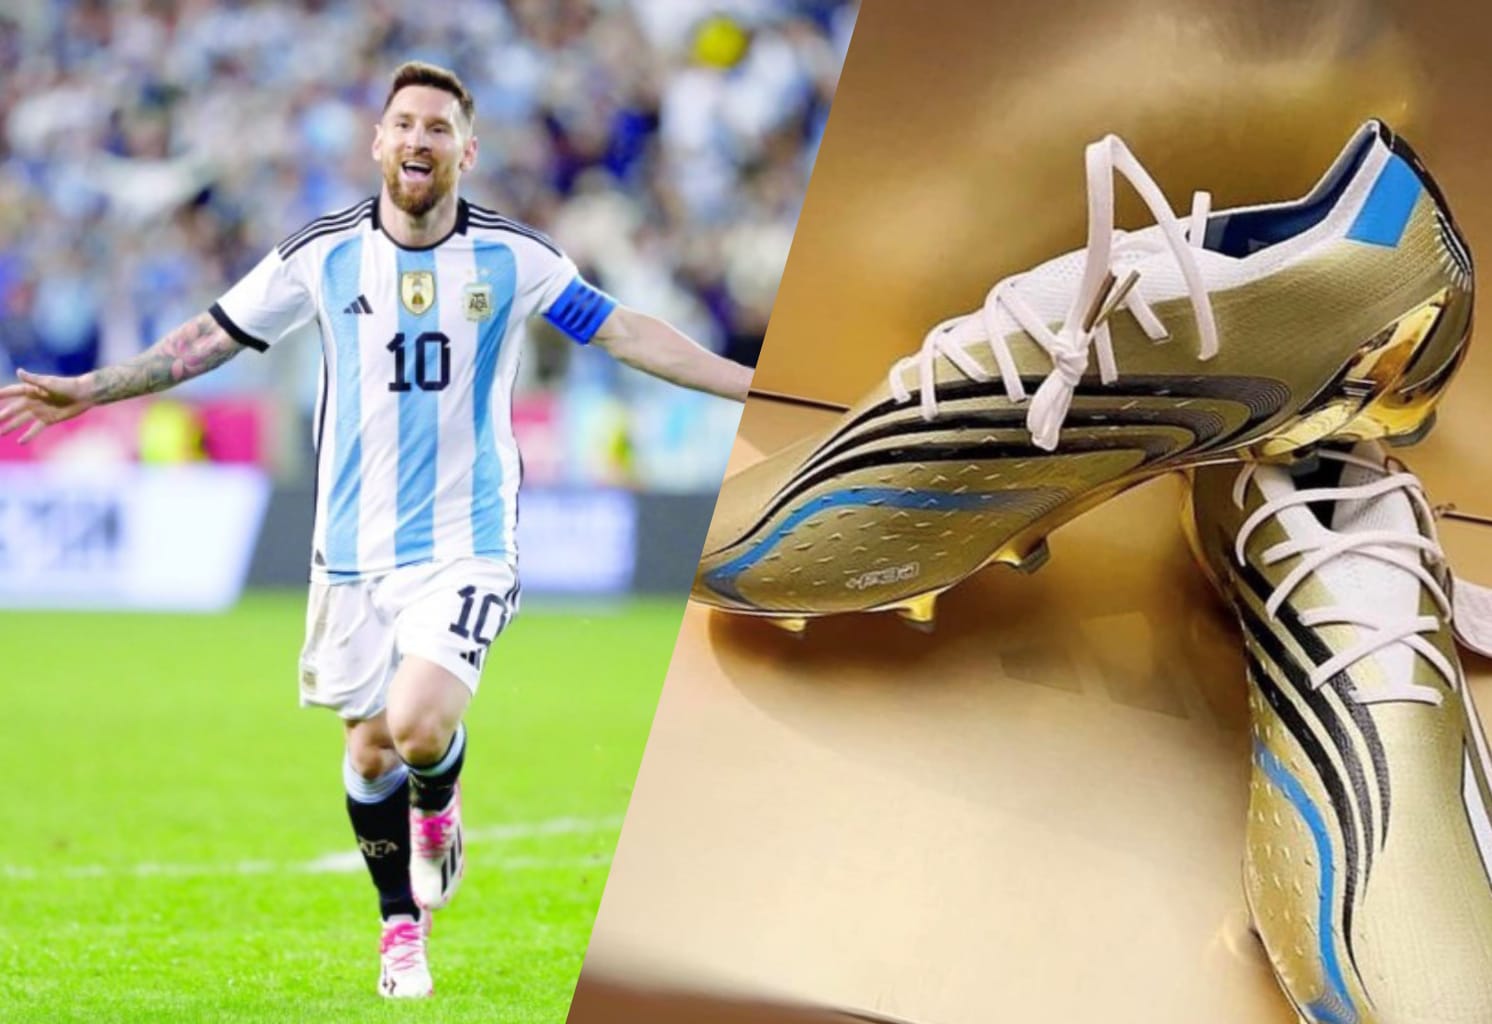 Lionel Messi's Cup Boots: Lionel Messi's boots for upcoming FIFA World Cup revealed